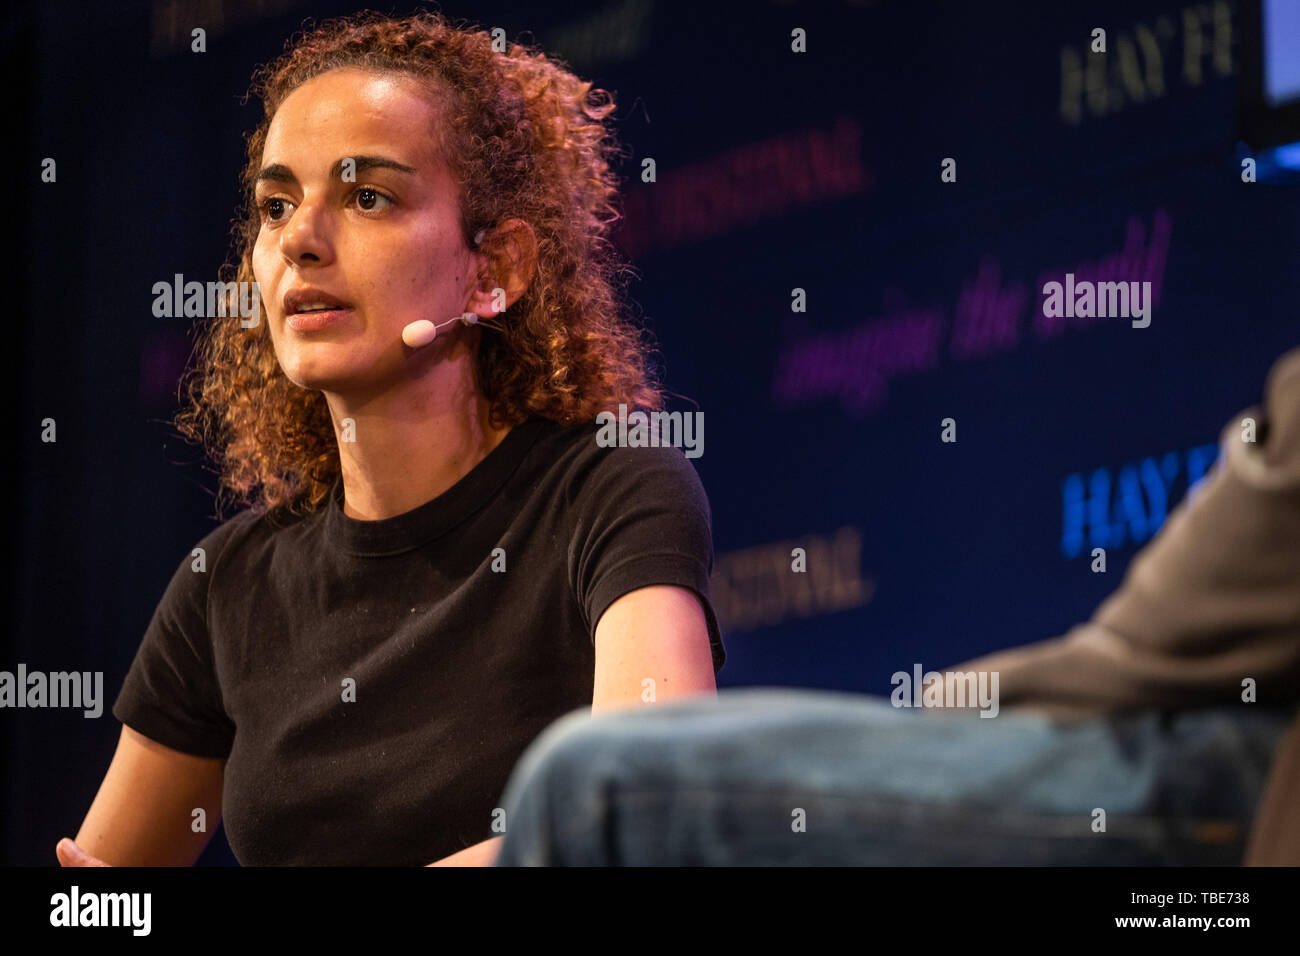 The Hay Festival, Hay on Wye, Wales UK , Saturday 01 June 2019.   Leïla Slimani,  Franco-Moroccan writer and journalist. In 2016 she was awarded the Prix Goncourt for her novel Chanson douce.  Appearing on stage at the 2019 Hay Festival  The festival, now in its 32nd year, held annually in the small town of Hay on Wye on the Wales - England border,  attracts the finest writers, politicians and intellectuals from  across the globe for 10 days of talks and discussions, celebrating the best of the written word and critical debate  Photo © Keith Morris / Alamy Live News Stock Photo